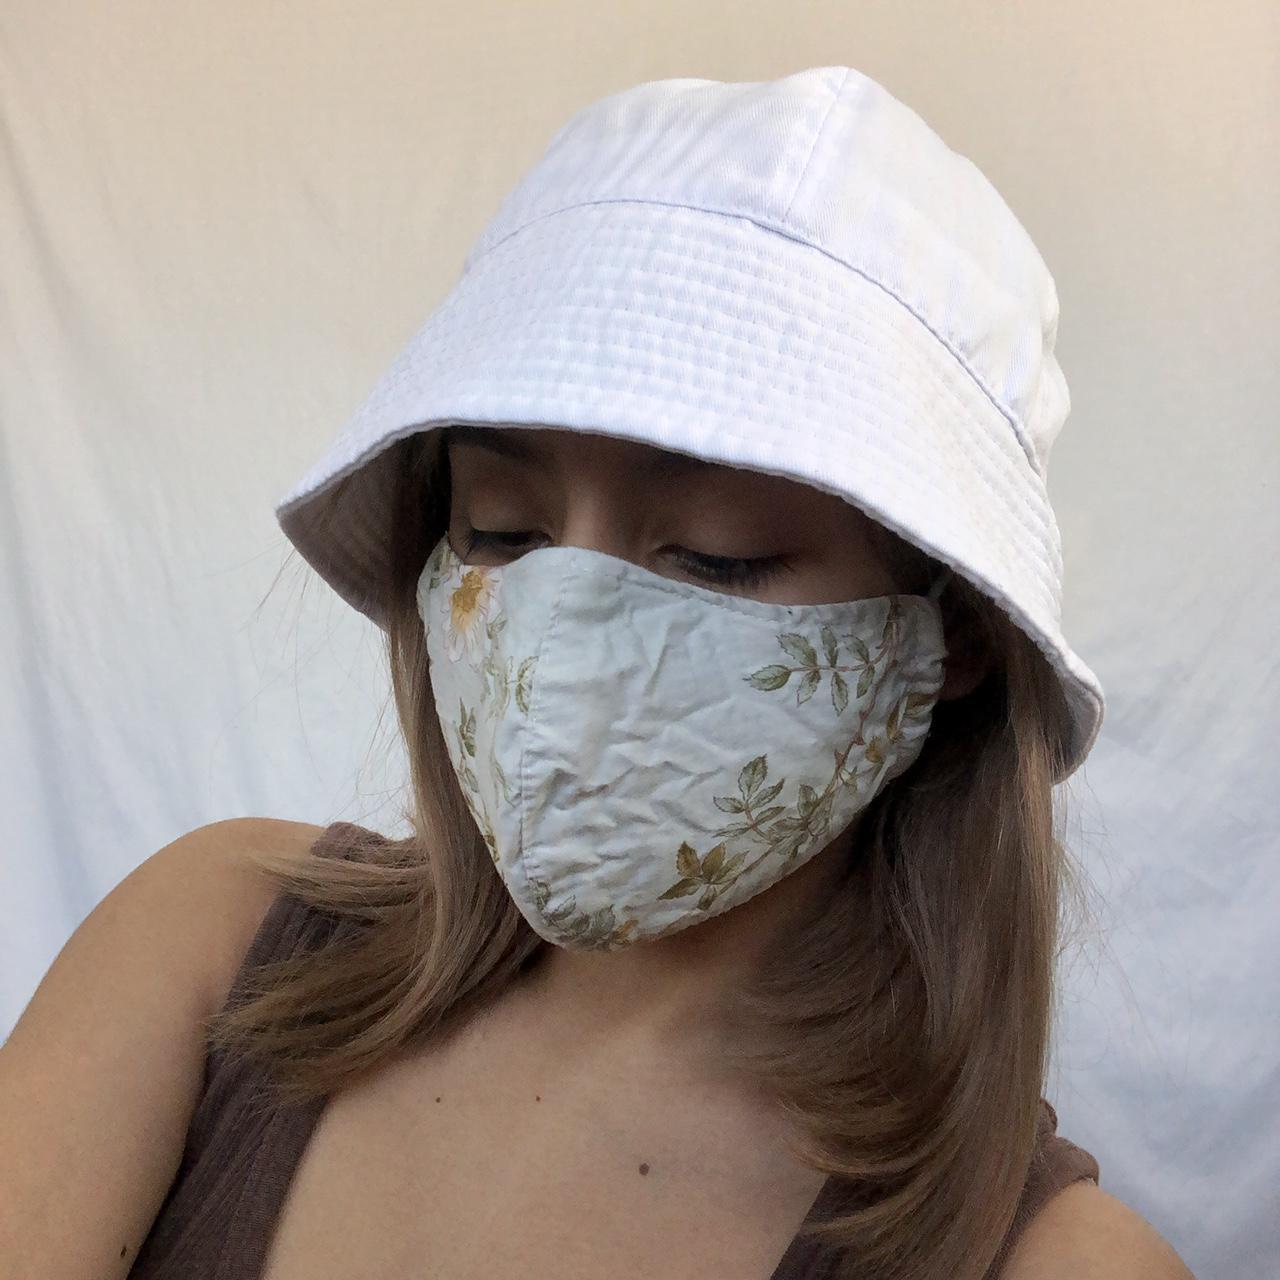 Product Image 2 - White bucket hat
+$4.05 ship 

Unbranded